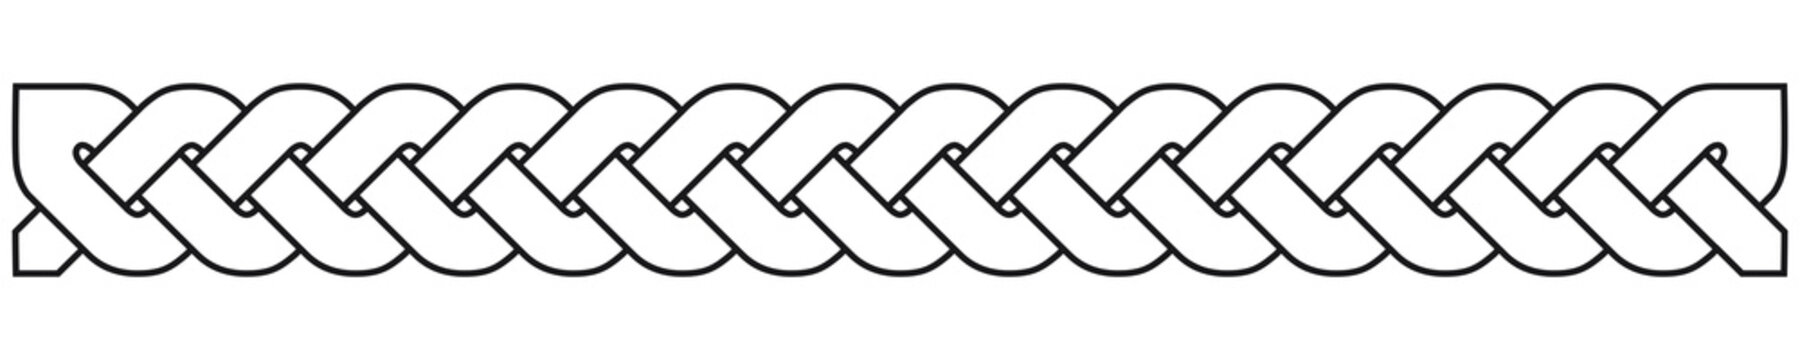 Celtic knot border. Linear border made with Celtic knots for use in designs for St. Patrick's Day.